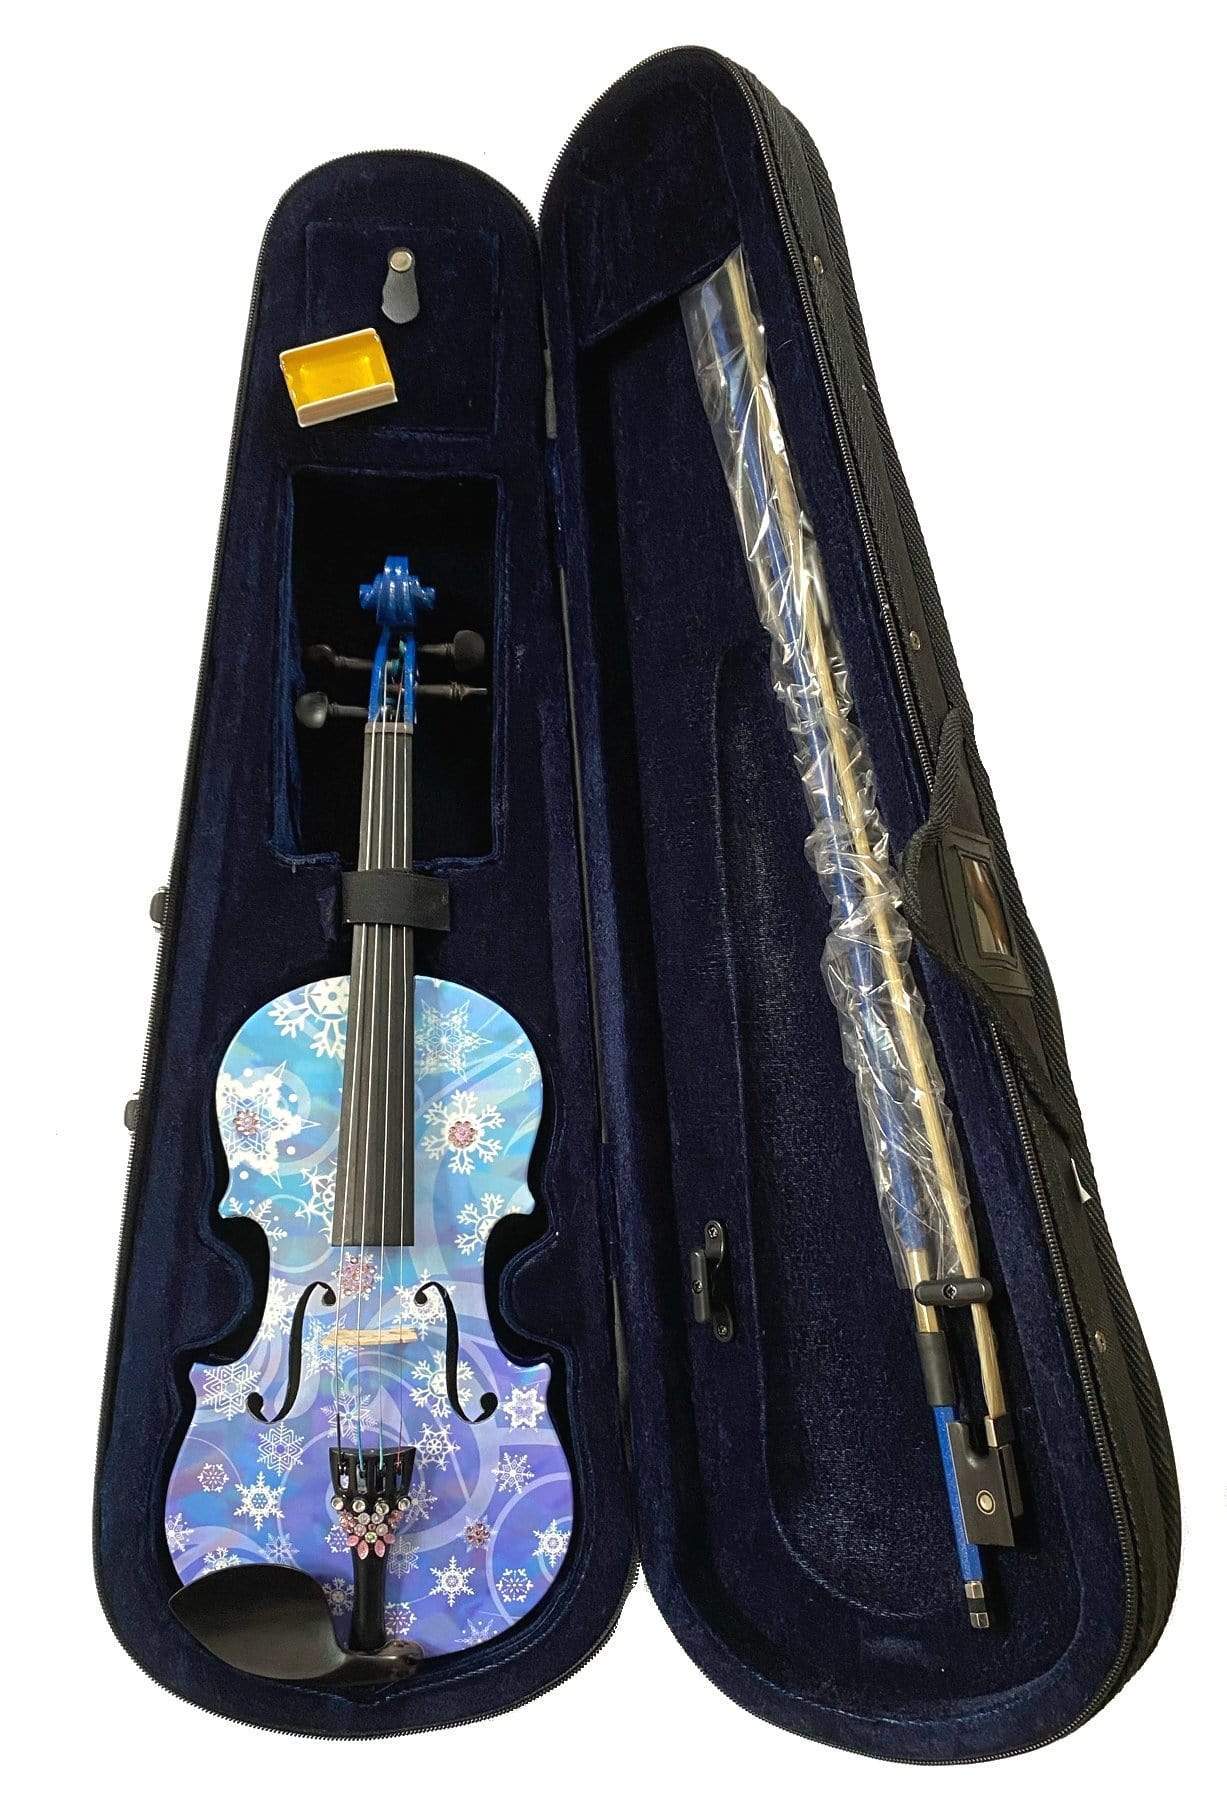 Rozanna's Violins Snowflake Violin Outfit w/ Bling